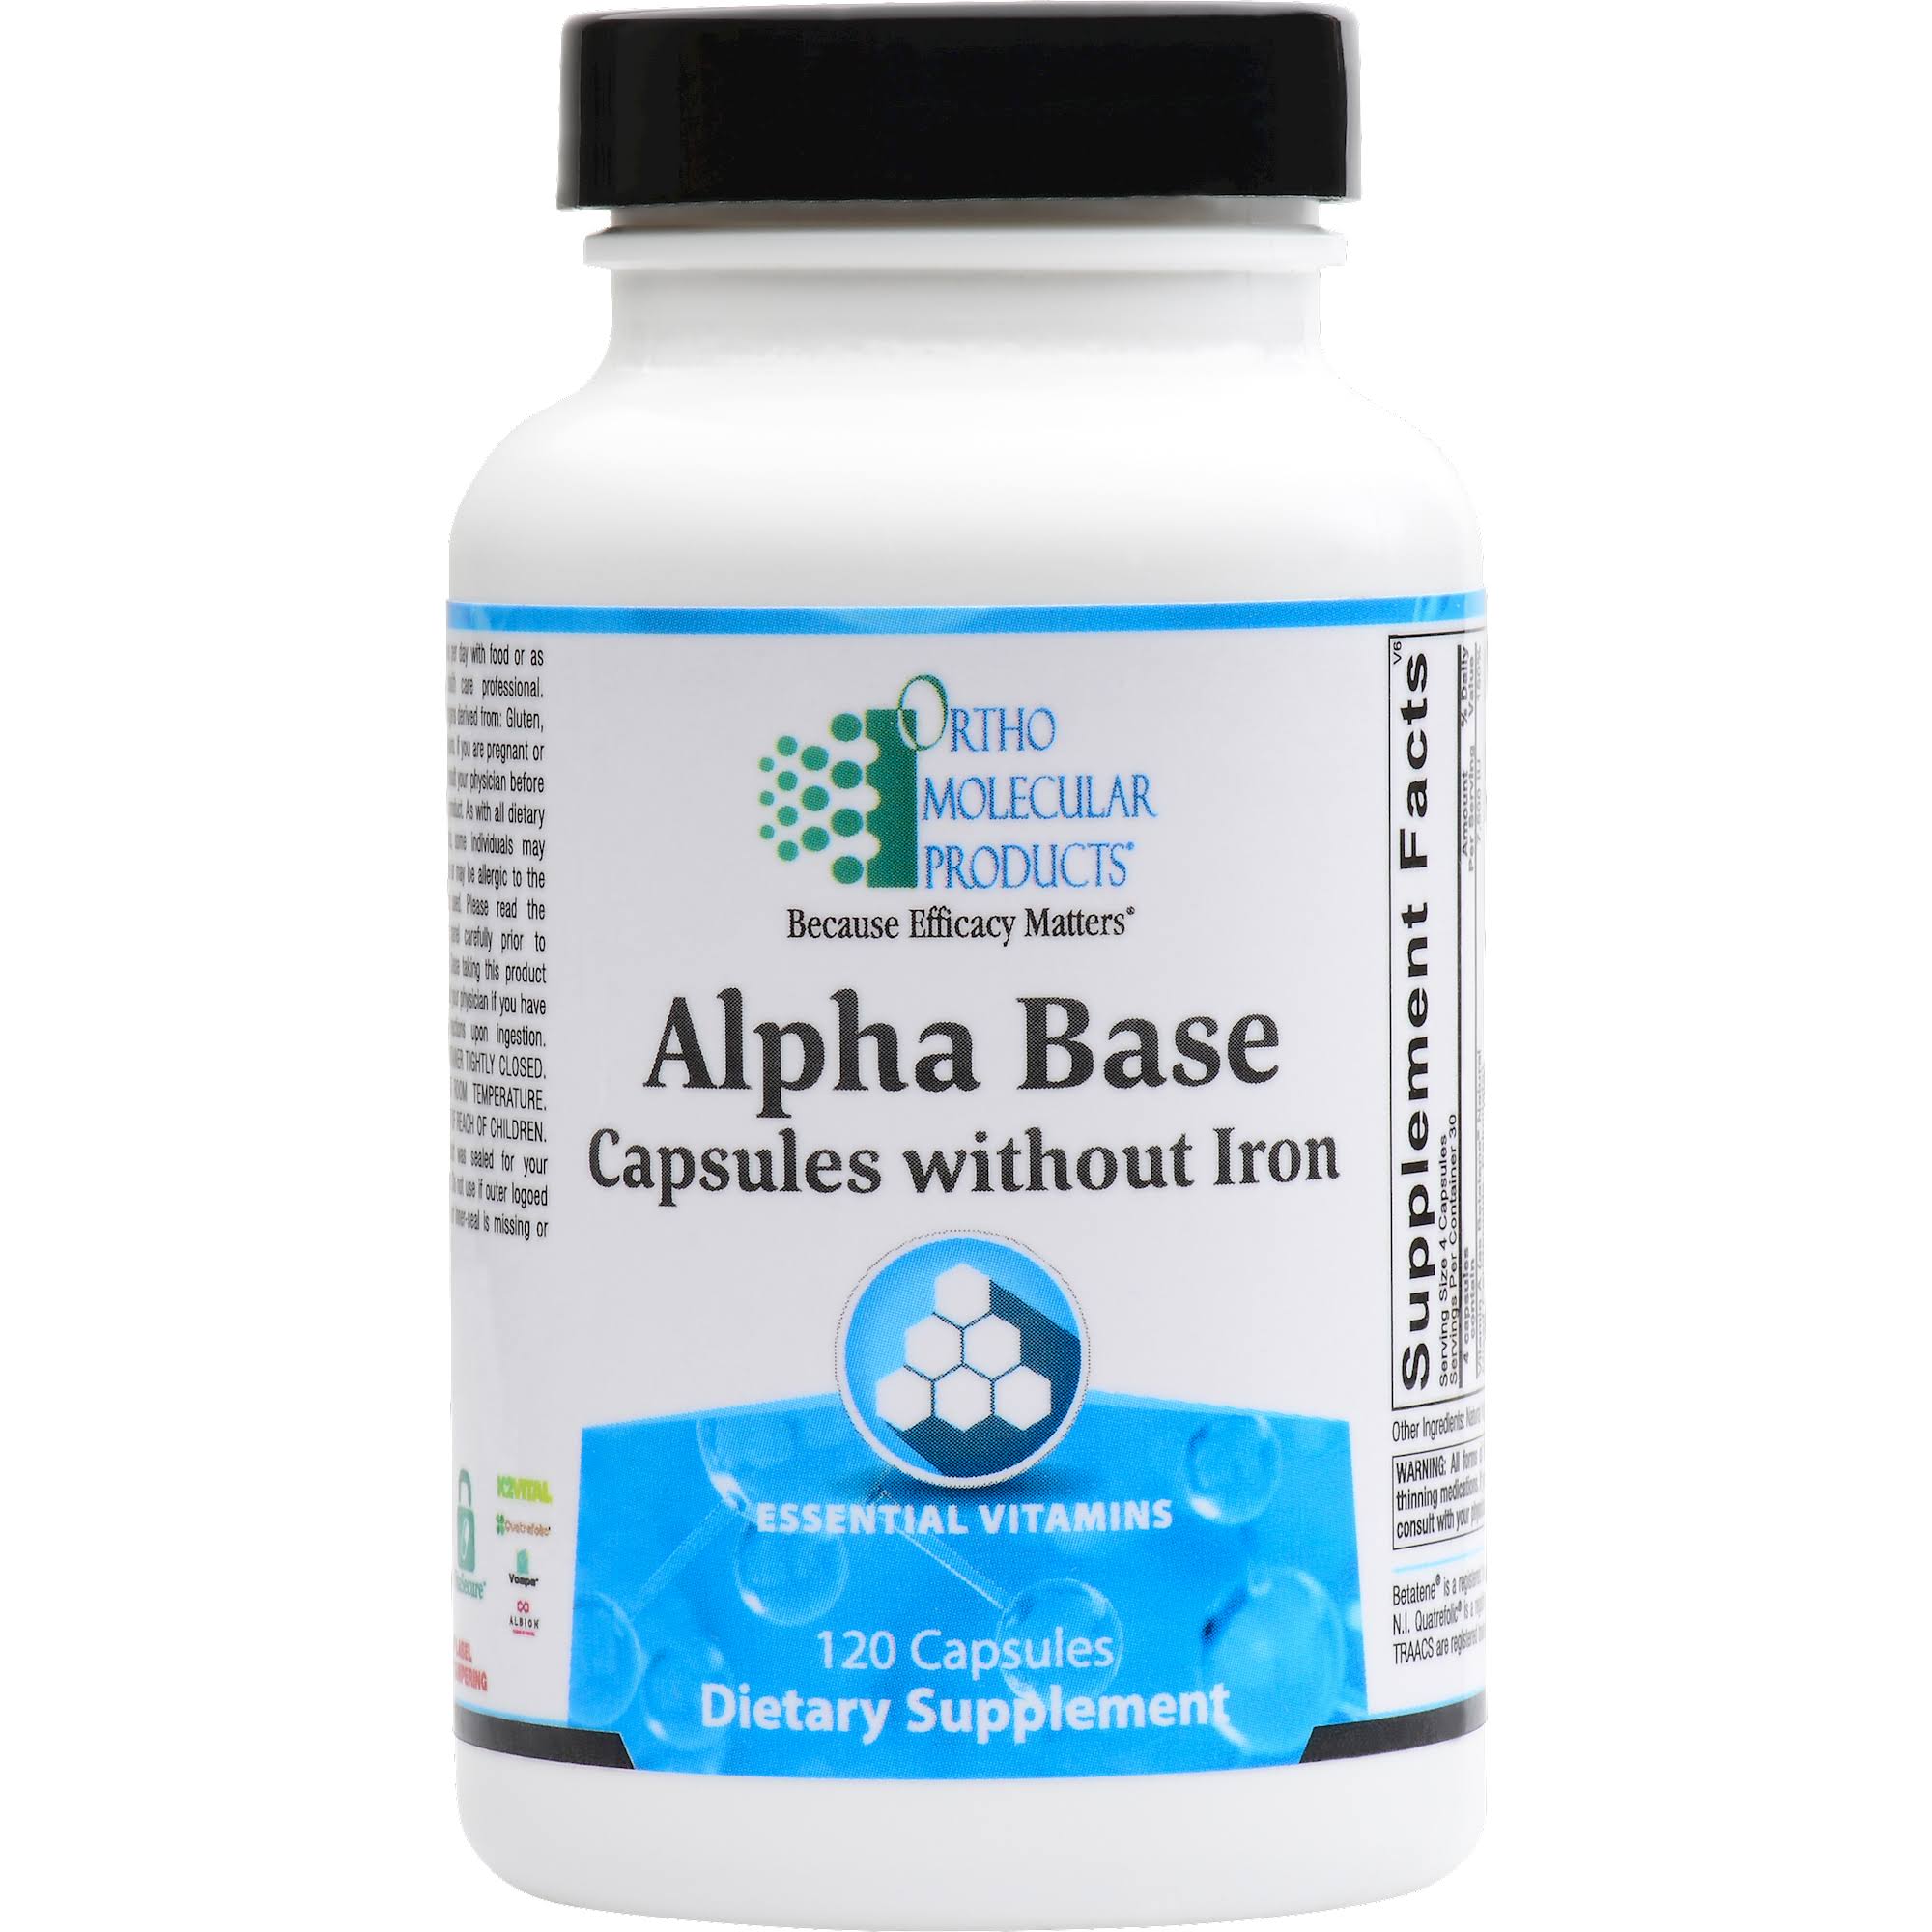 Ortho Molecular Alpha Base Tablets without Iron - 120 Capsules